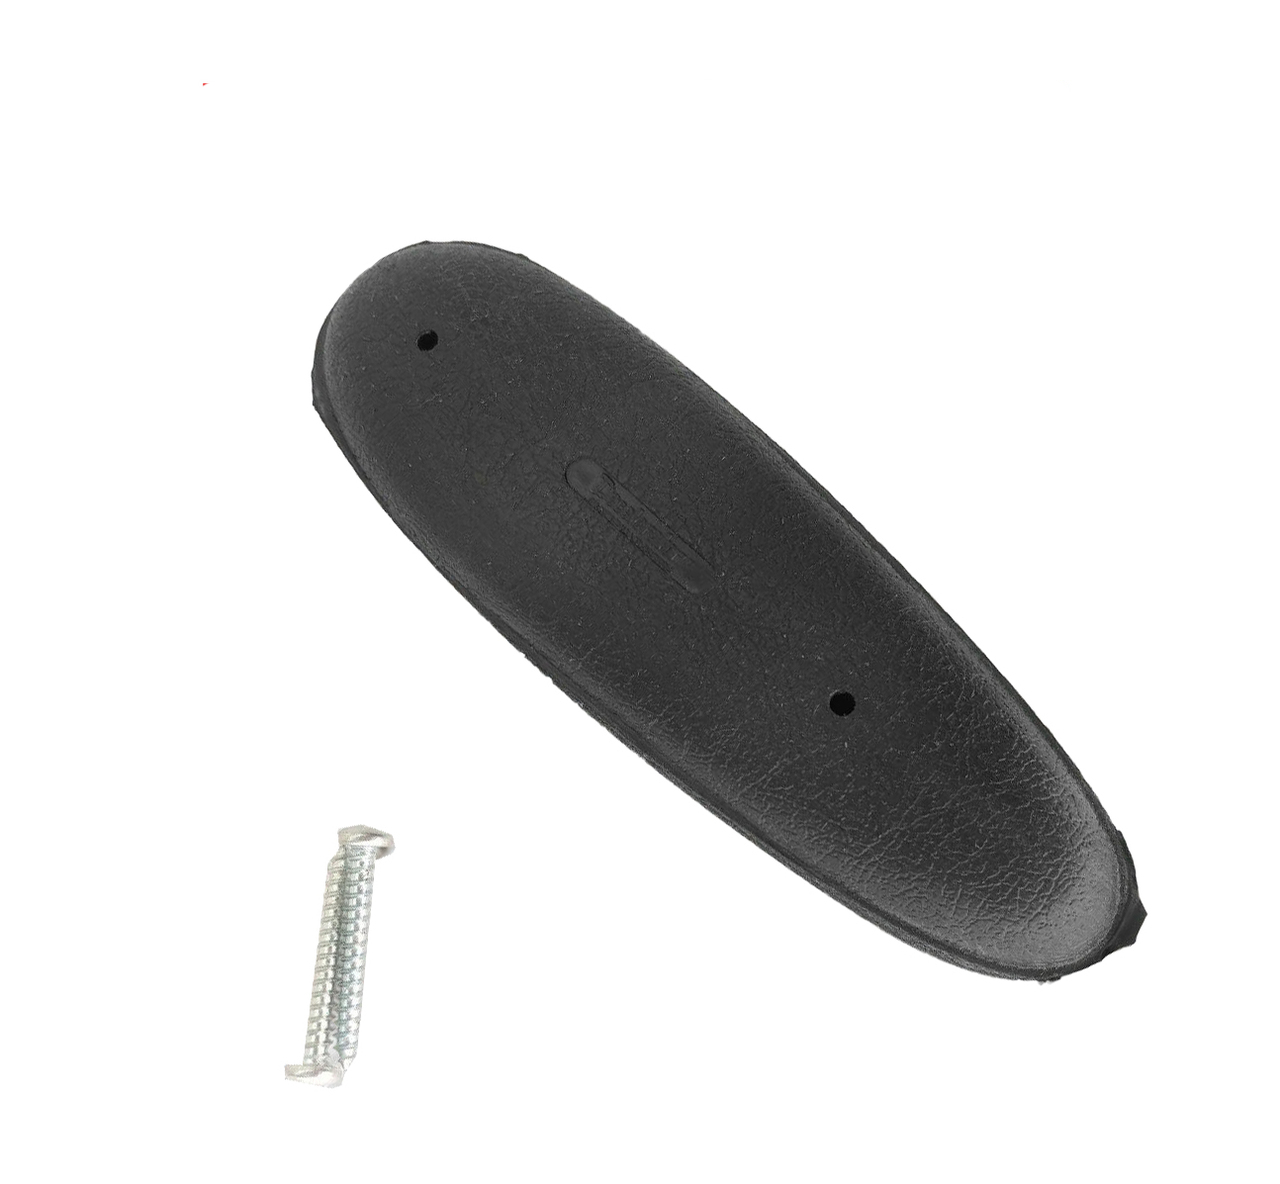 Pachmayr 1" Decelerator Rubber Recoil Pad Small 5.3" x 1.68" For Rifle Stocks